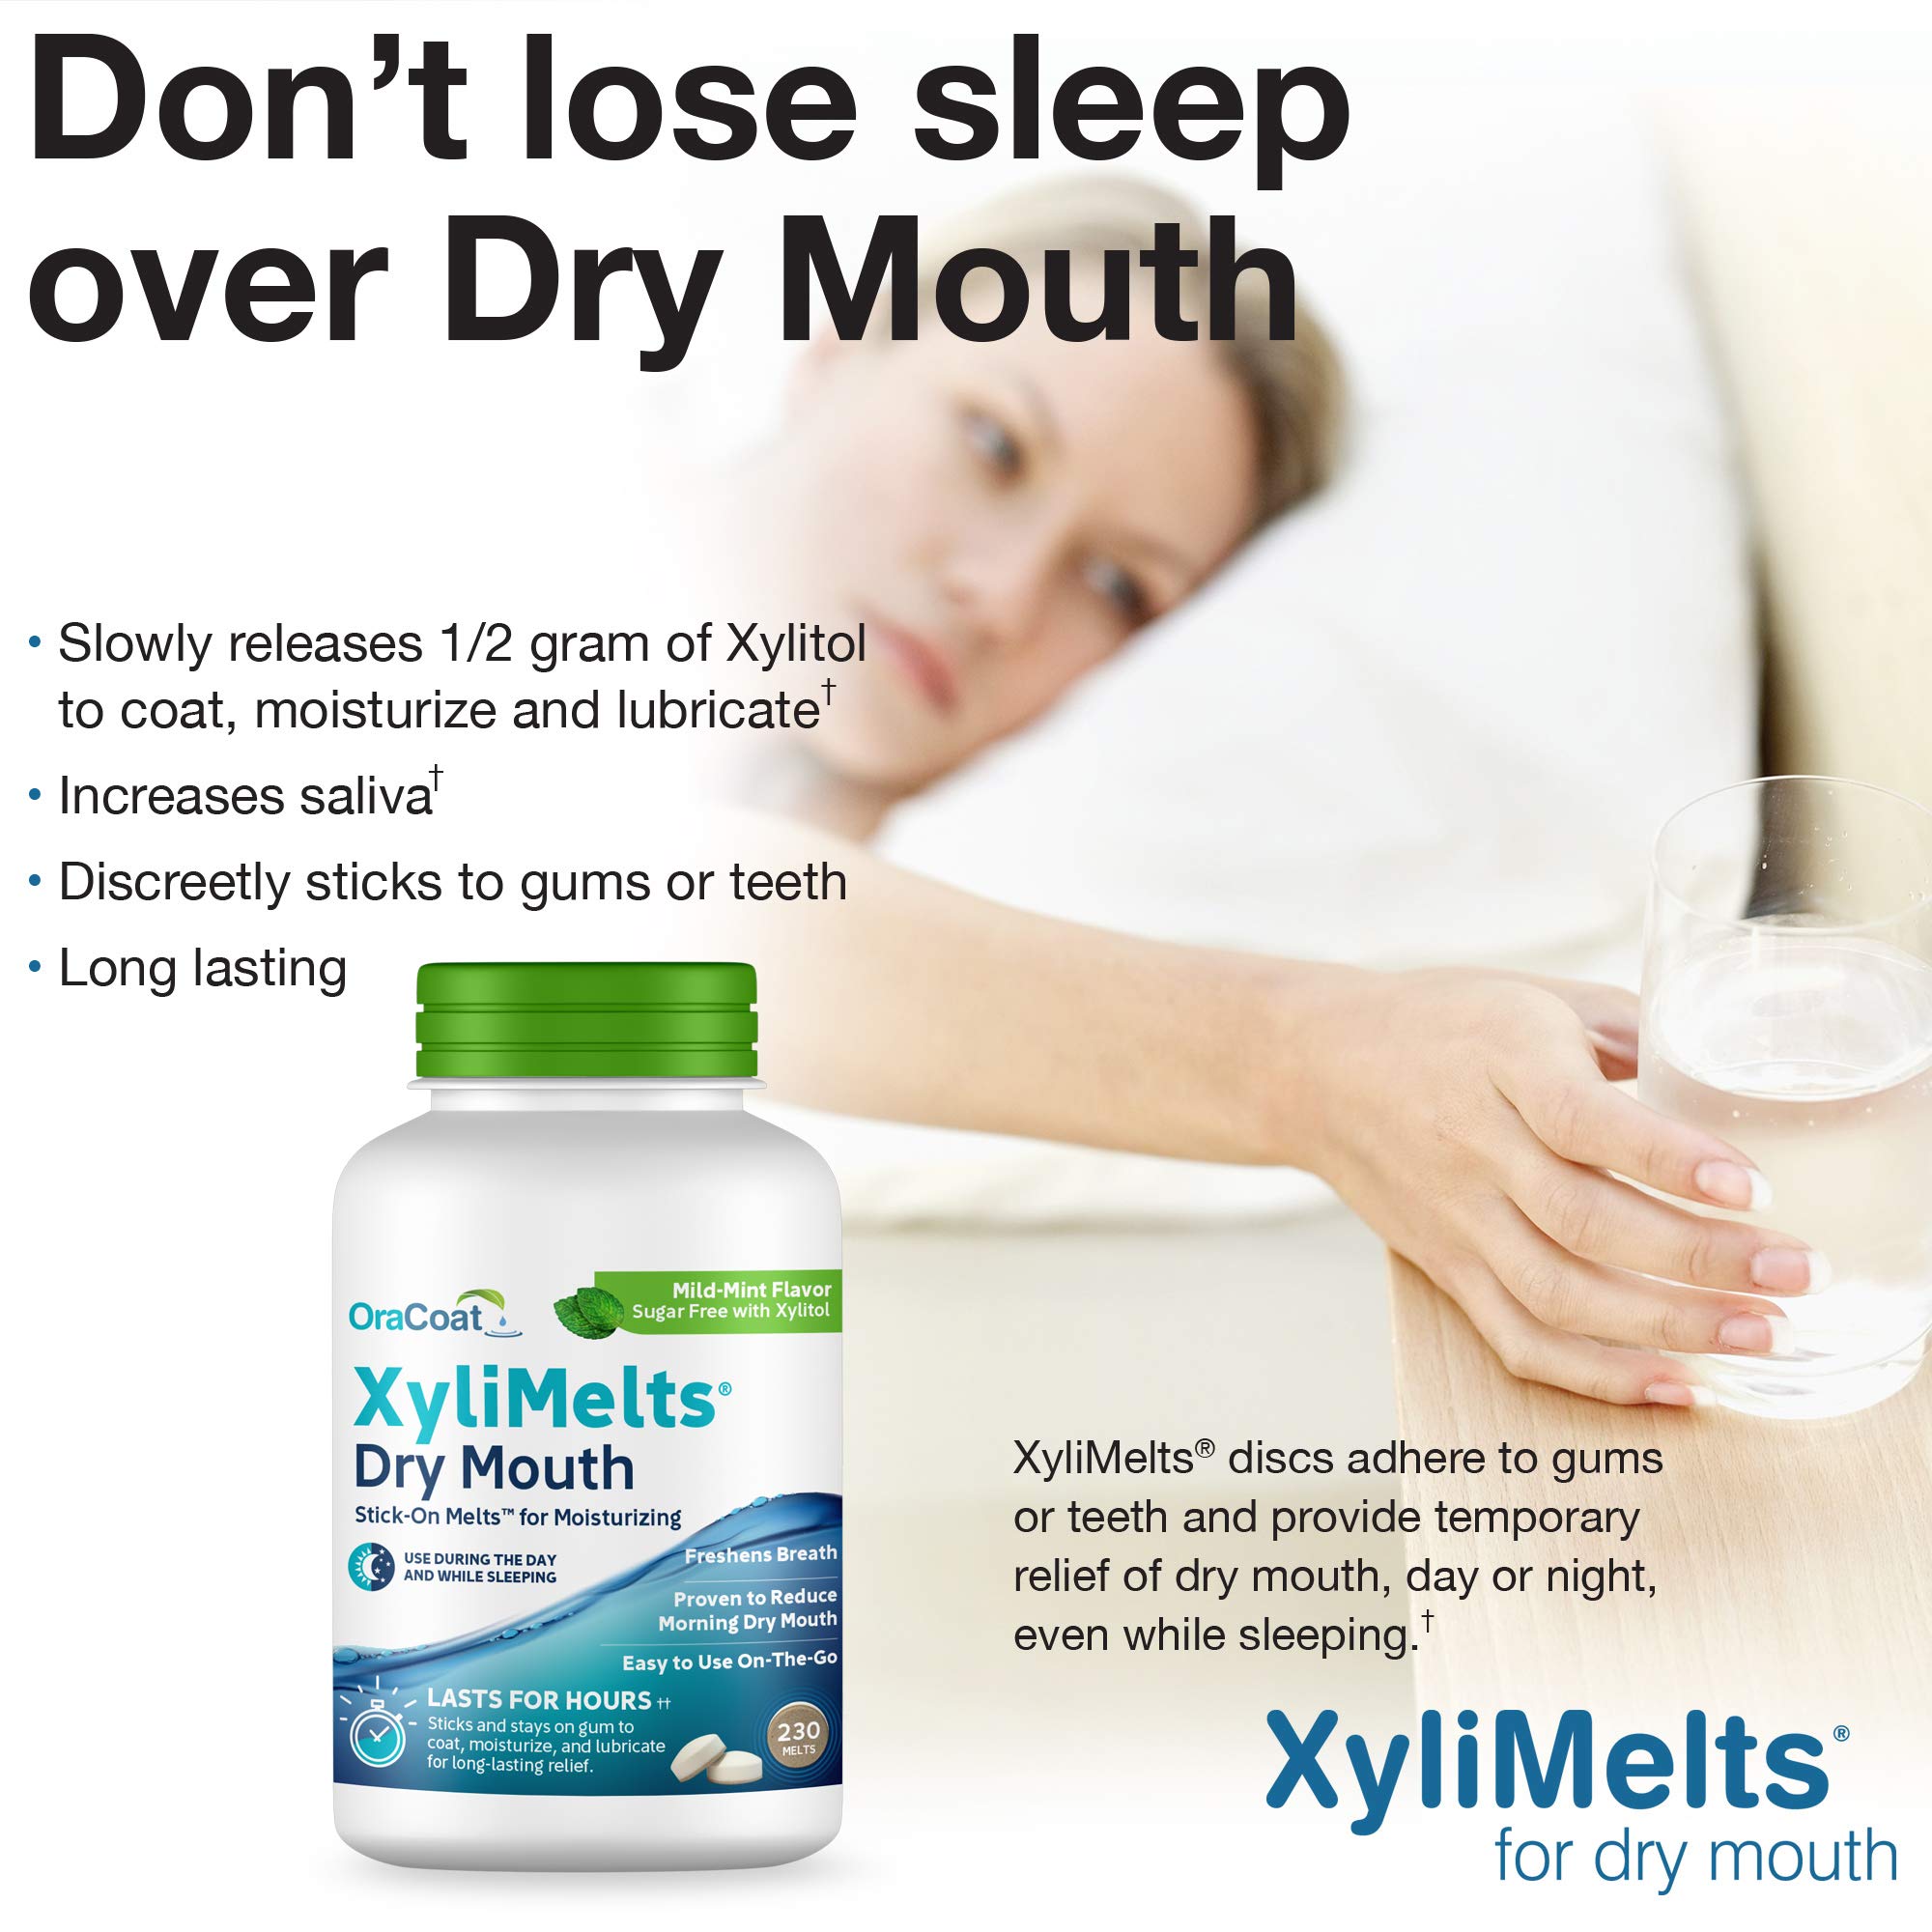 OraCoat XyliMelts Dry Mouth Relief Oral Adhering Discs Mild Mint with Xylitol, for Dry Mouth, Stimulates Saliva, Non-Acidic, Day and Night Use, Time Release for up to 8 Hours, 230 Count